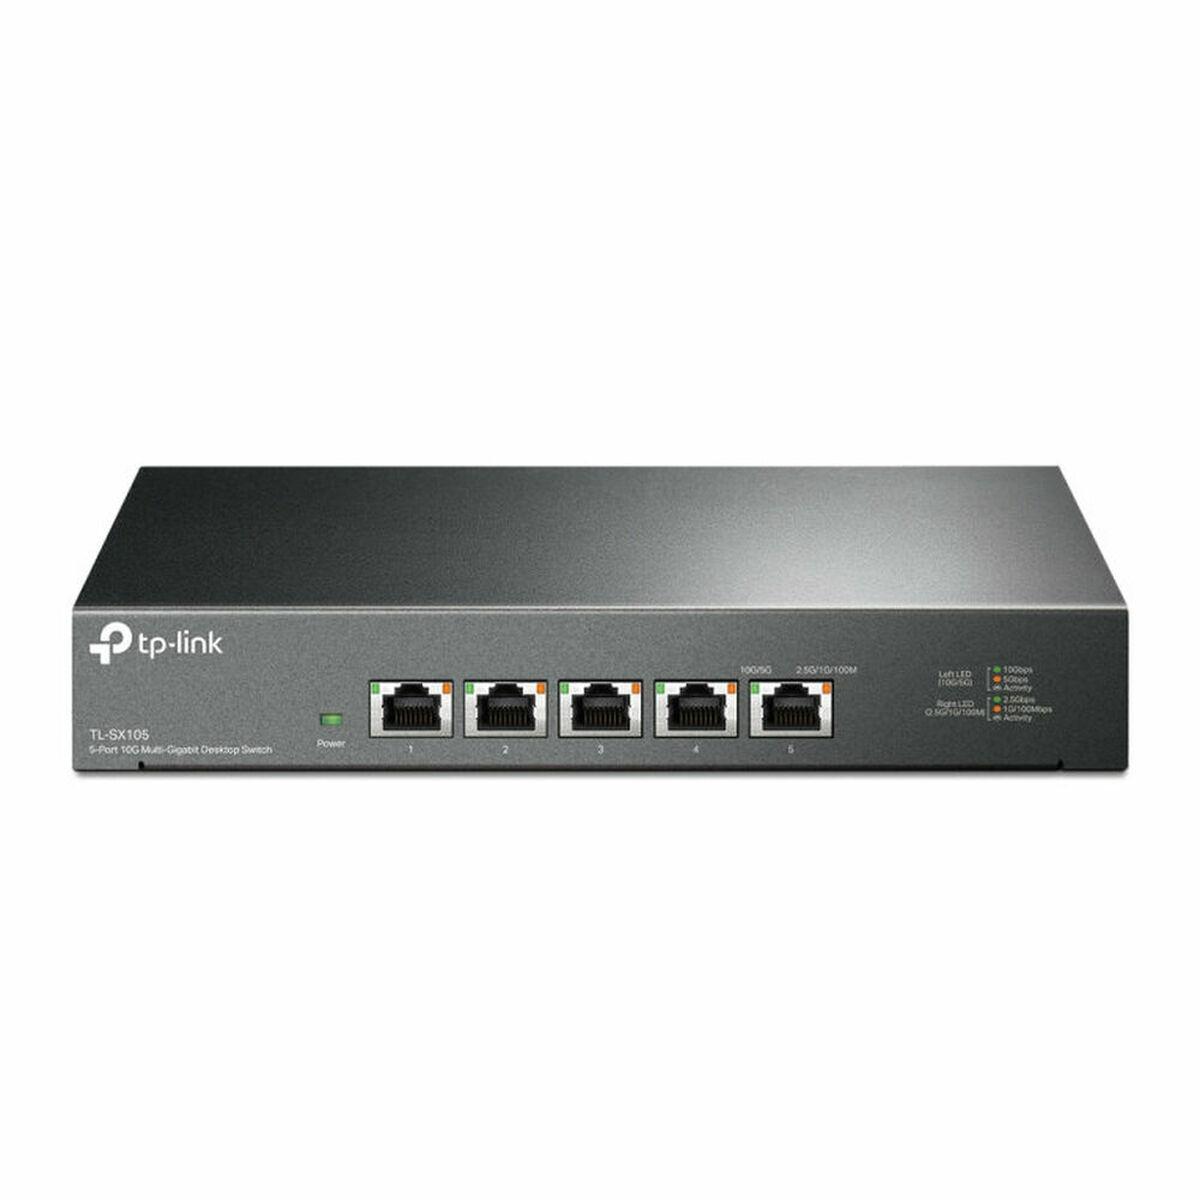 Switch 5 TP-LINK 6935